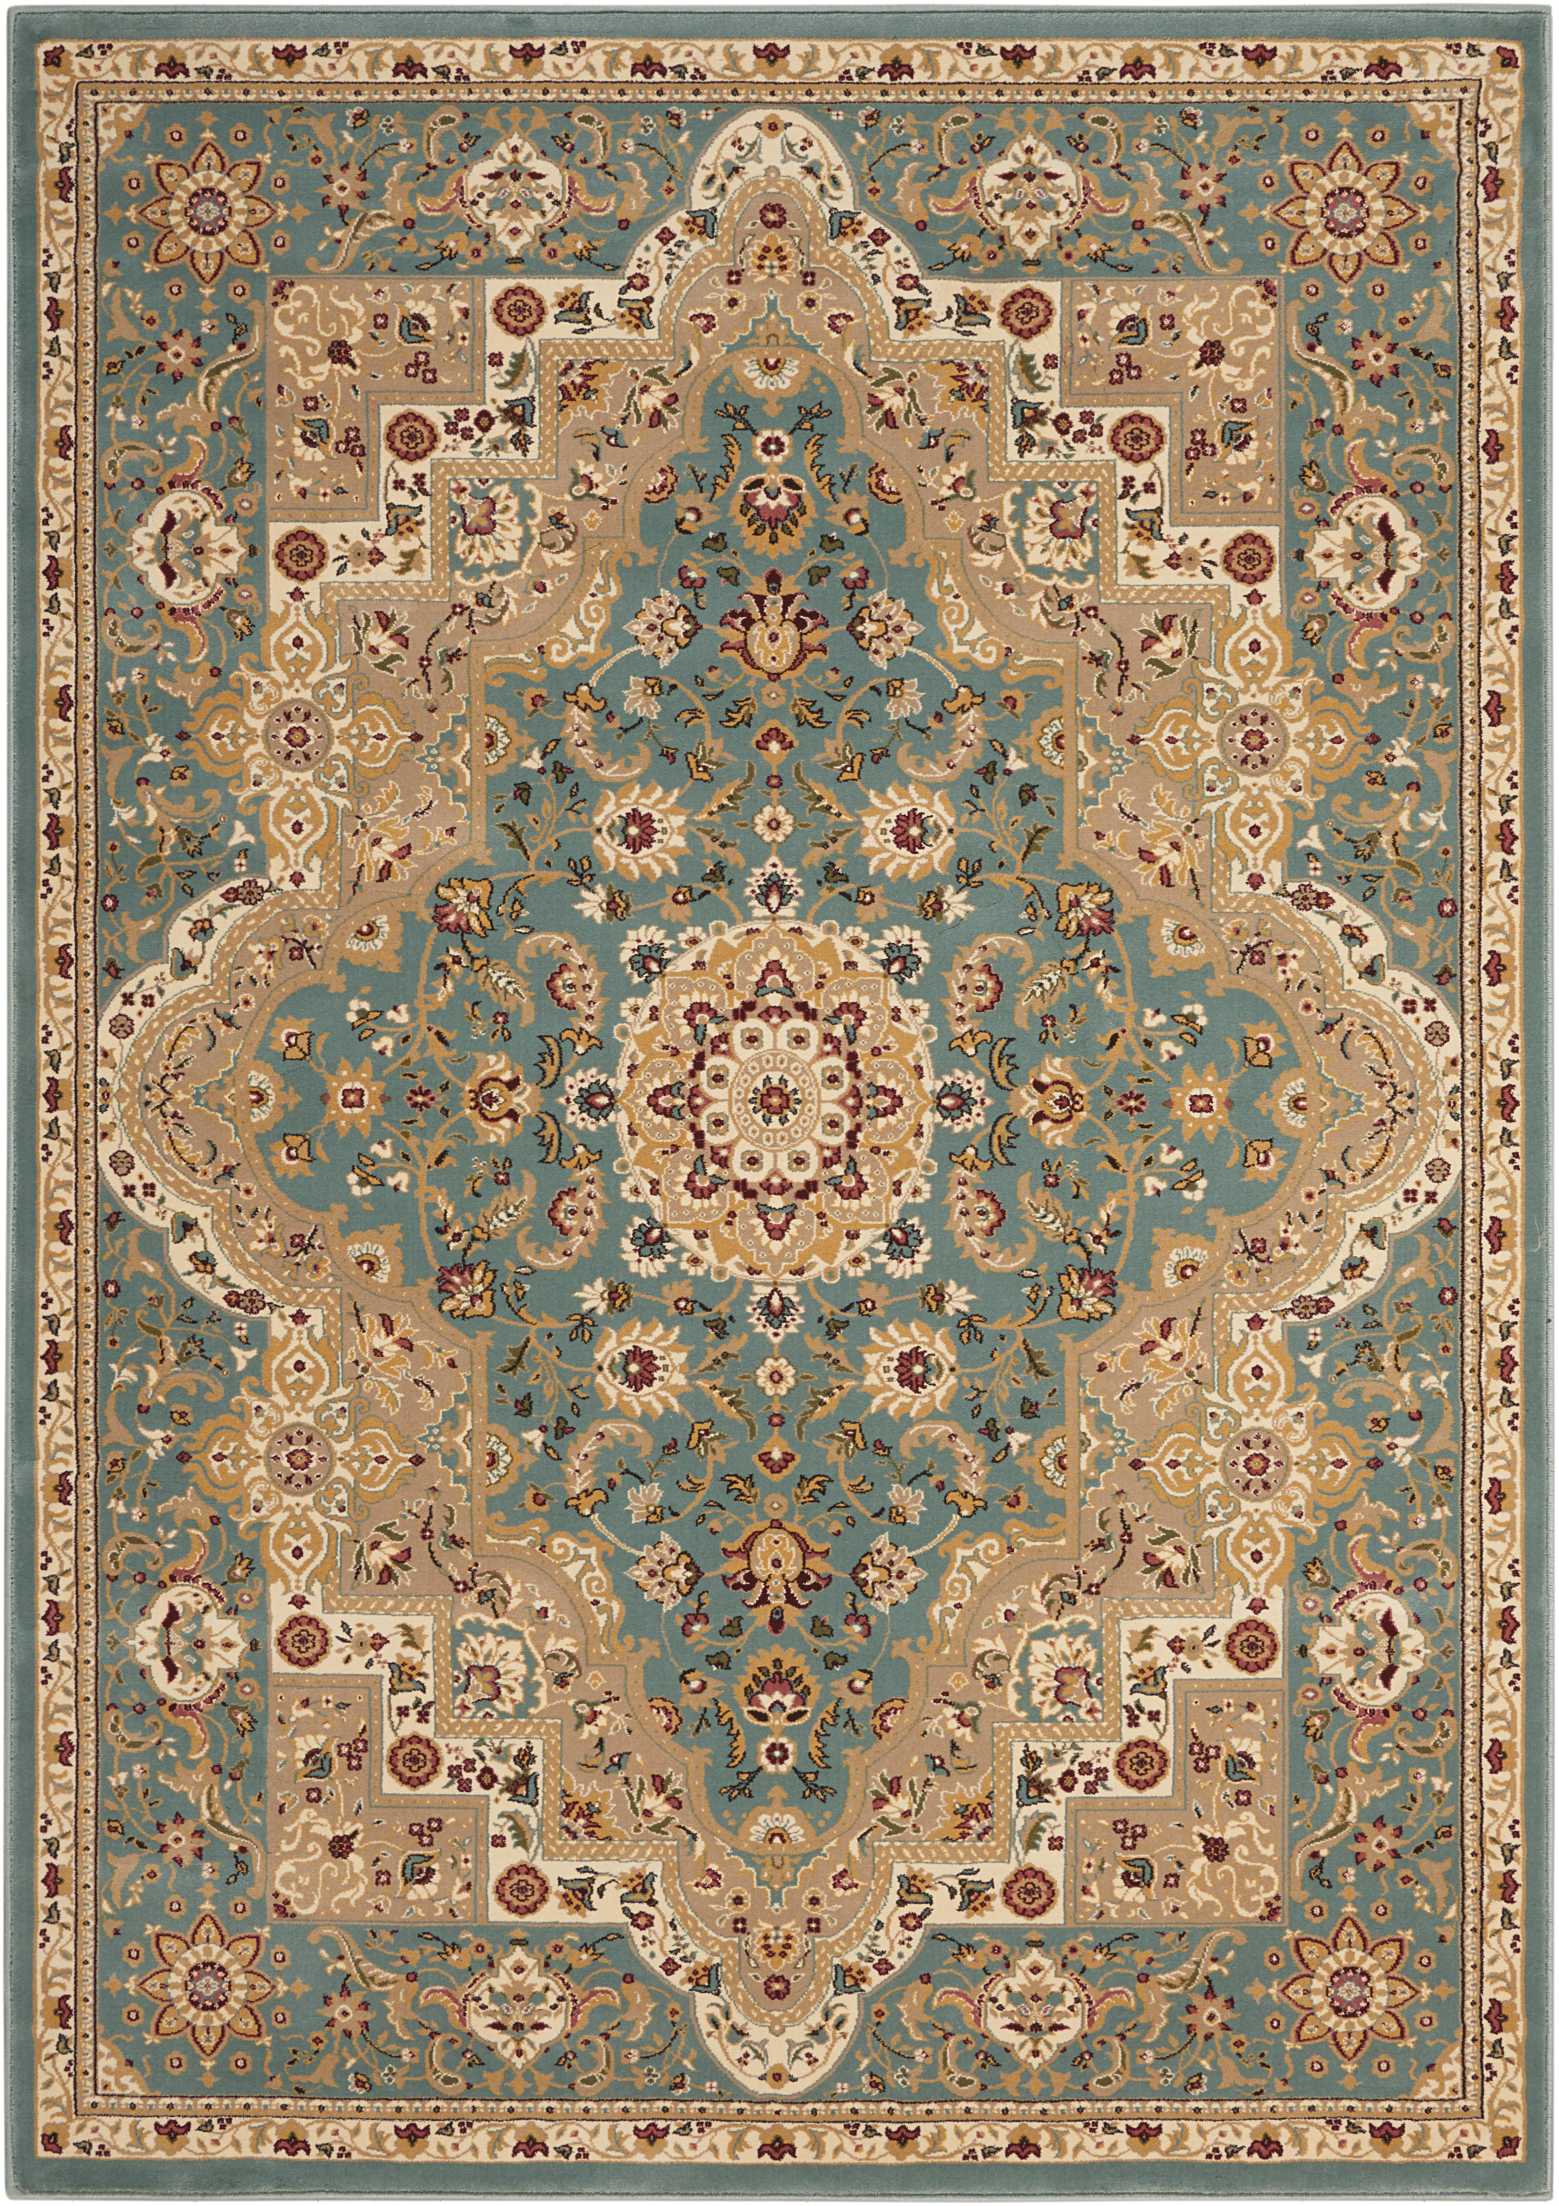 Kathy Ireland  Antiquities Imperial Garden Slate Blue Area Rug by Nourison